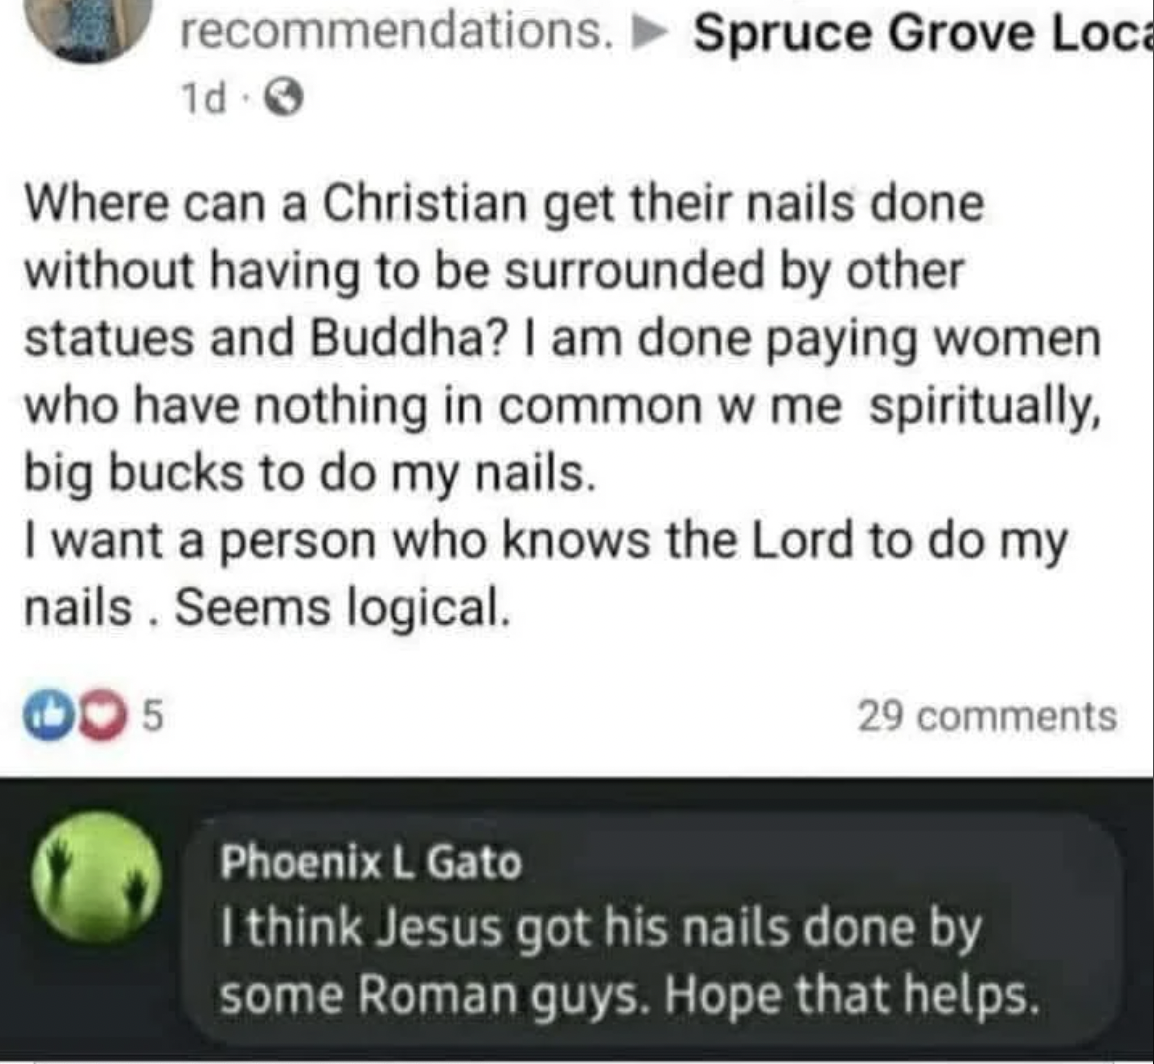 screenshot - recommendations. Spruce Grove Loca 1d O Where can a Christian get their nails done without having to be surrounded by other statues and Buddha? I am done paying women who have nothing in common w me spiritually, big bucks to do my nails. I wa